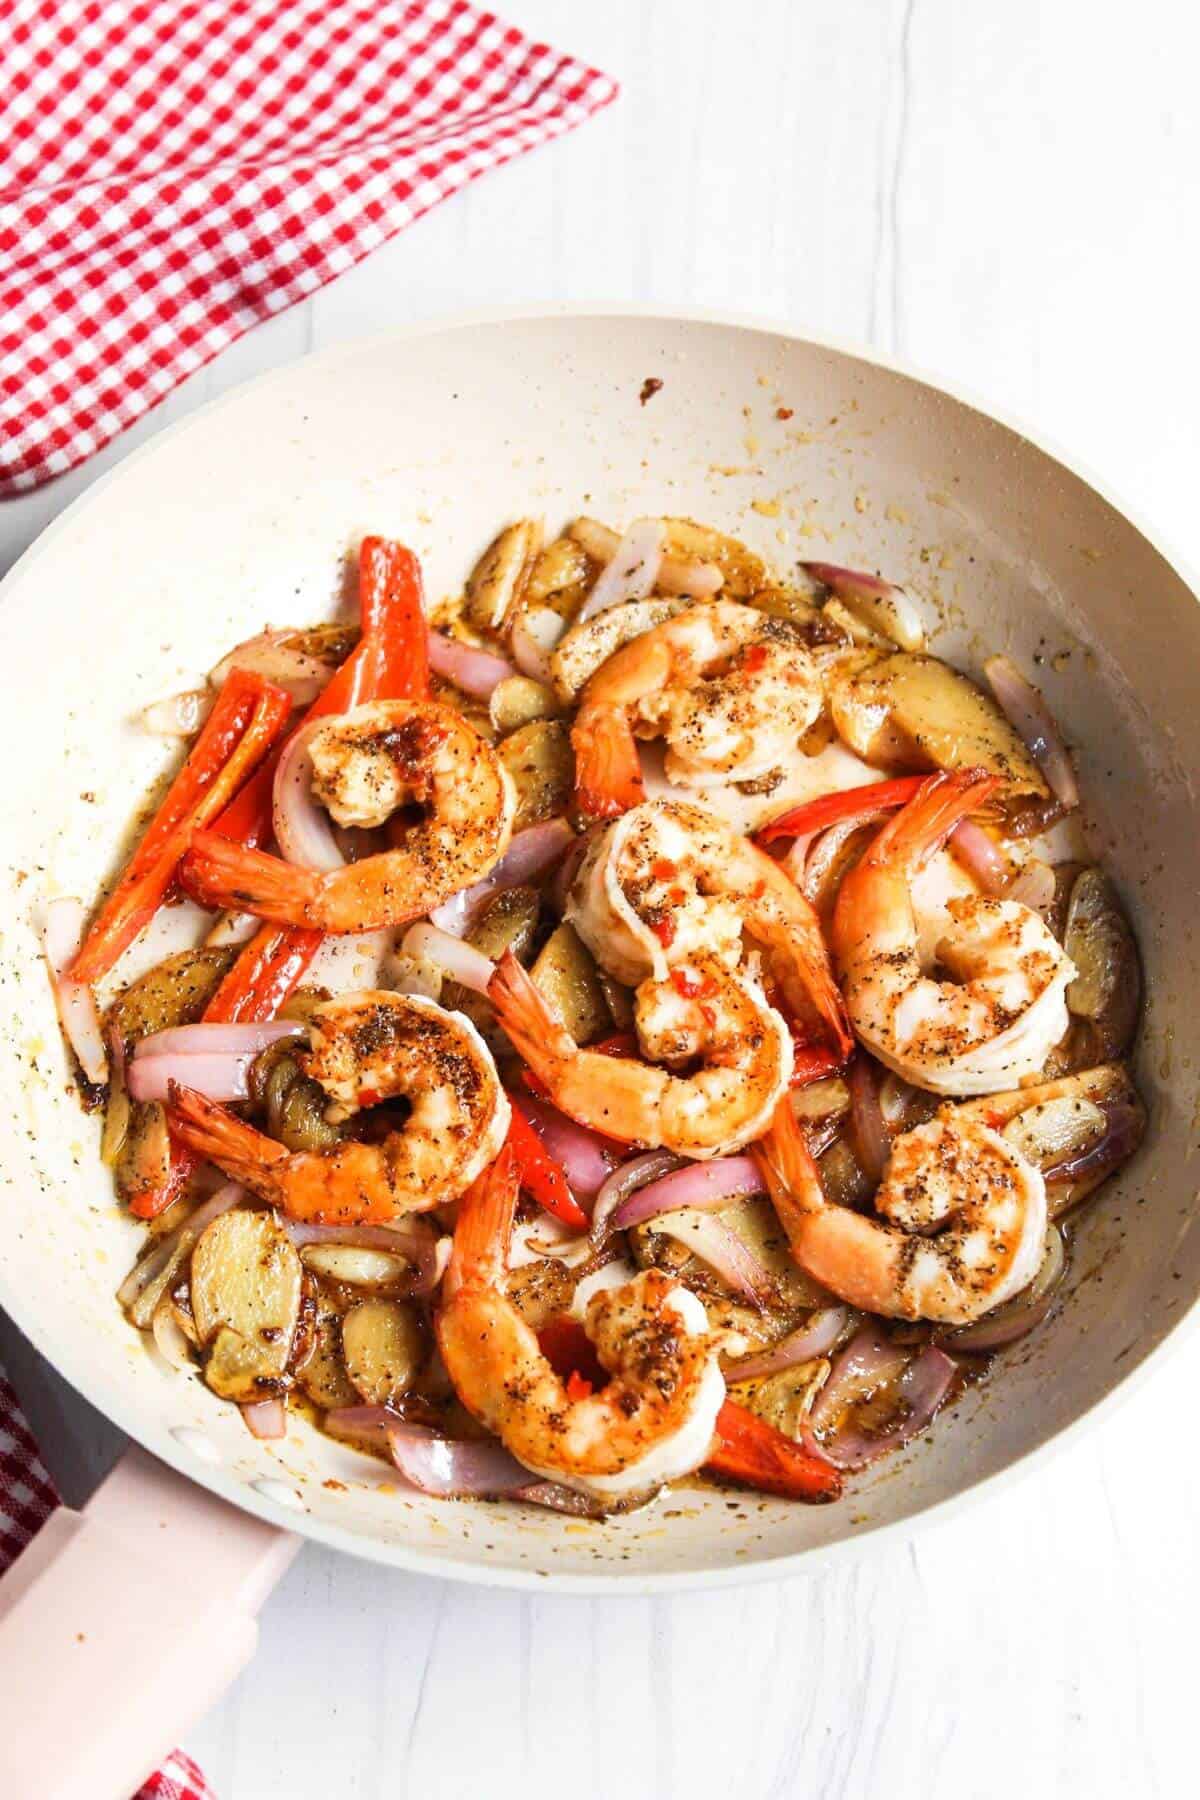 Cooked shrimp added to onion and peppers in skillet.